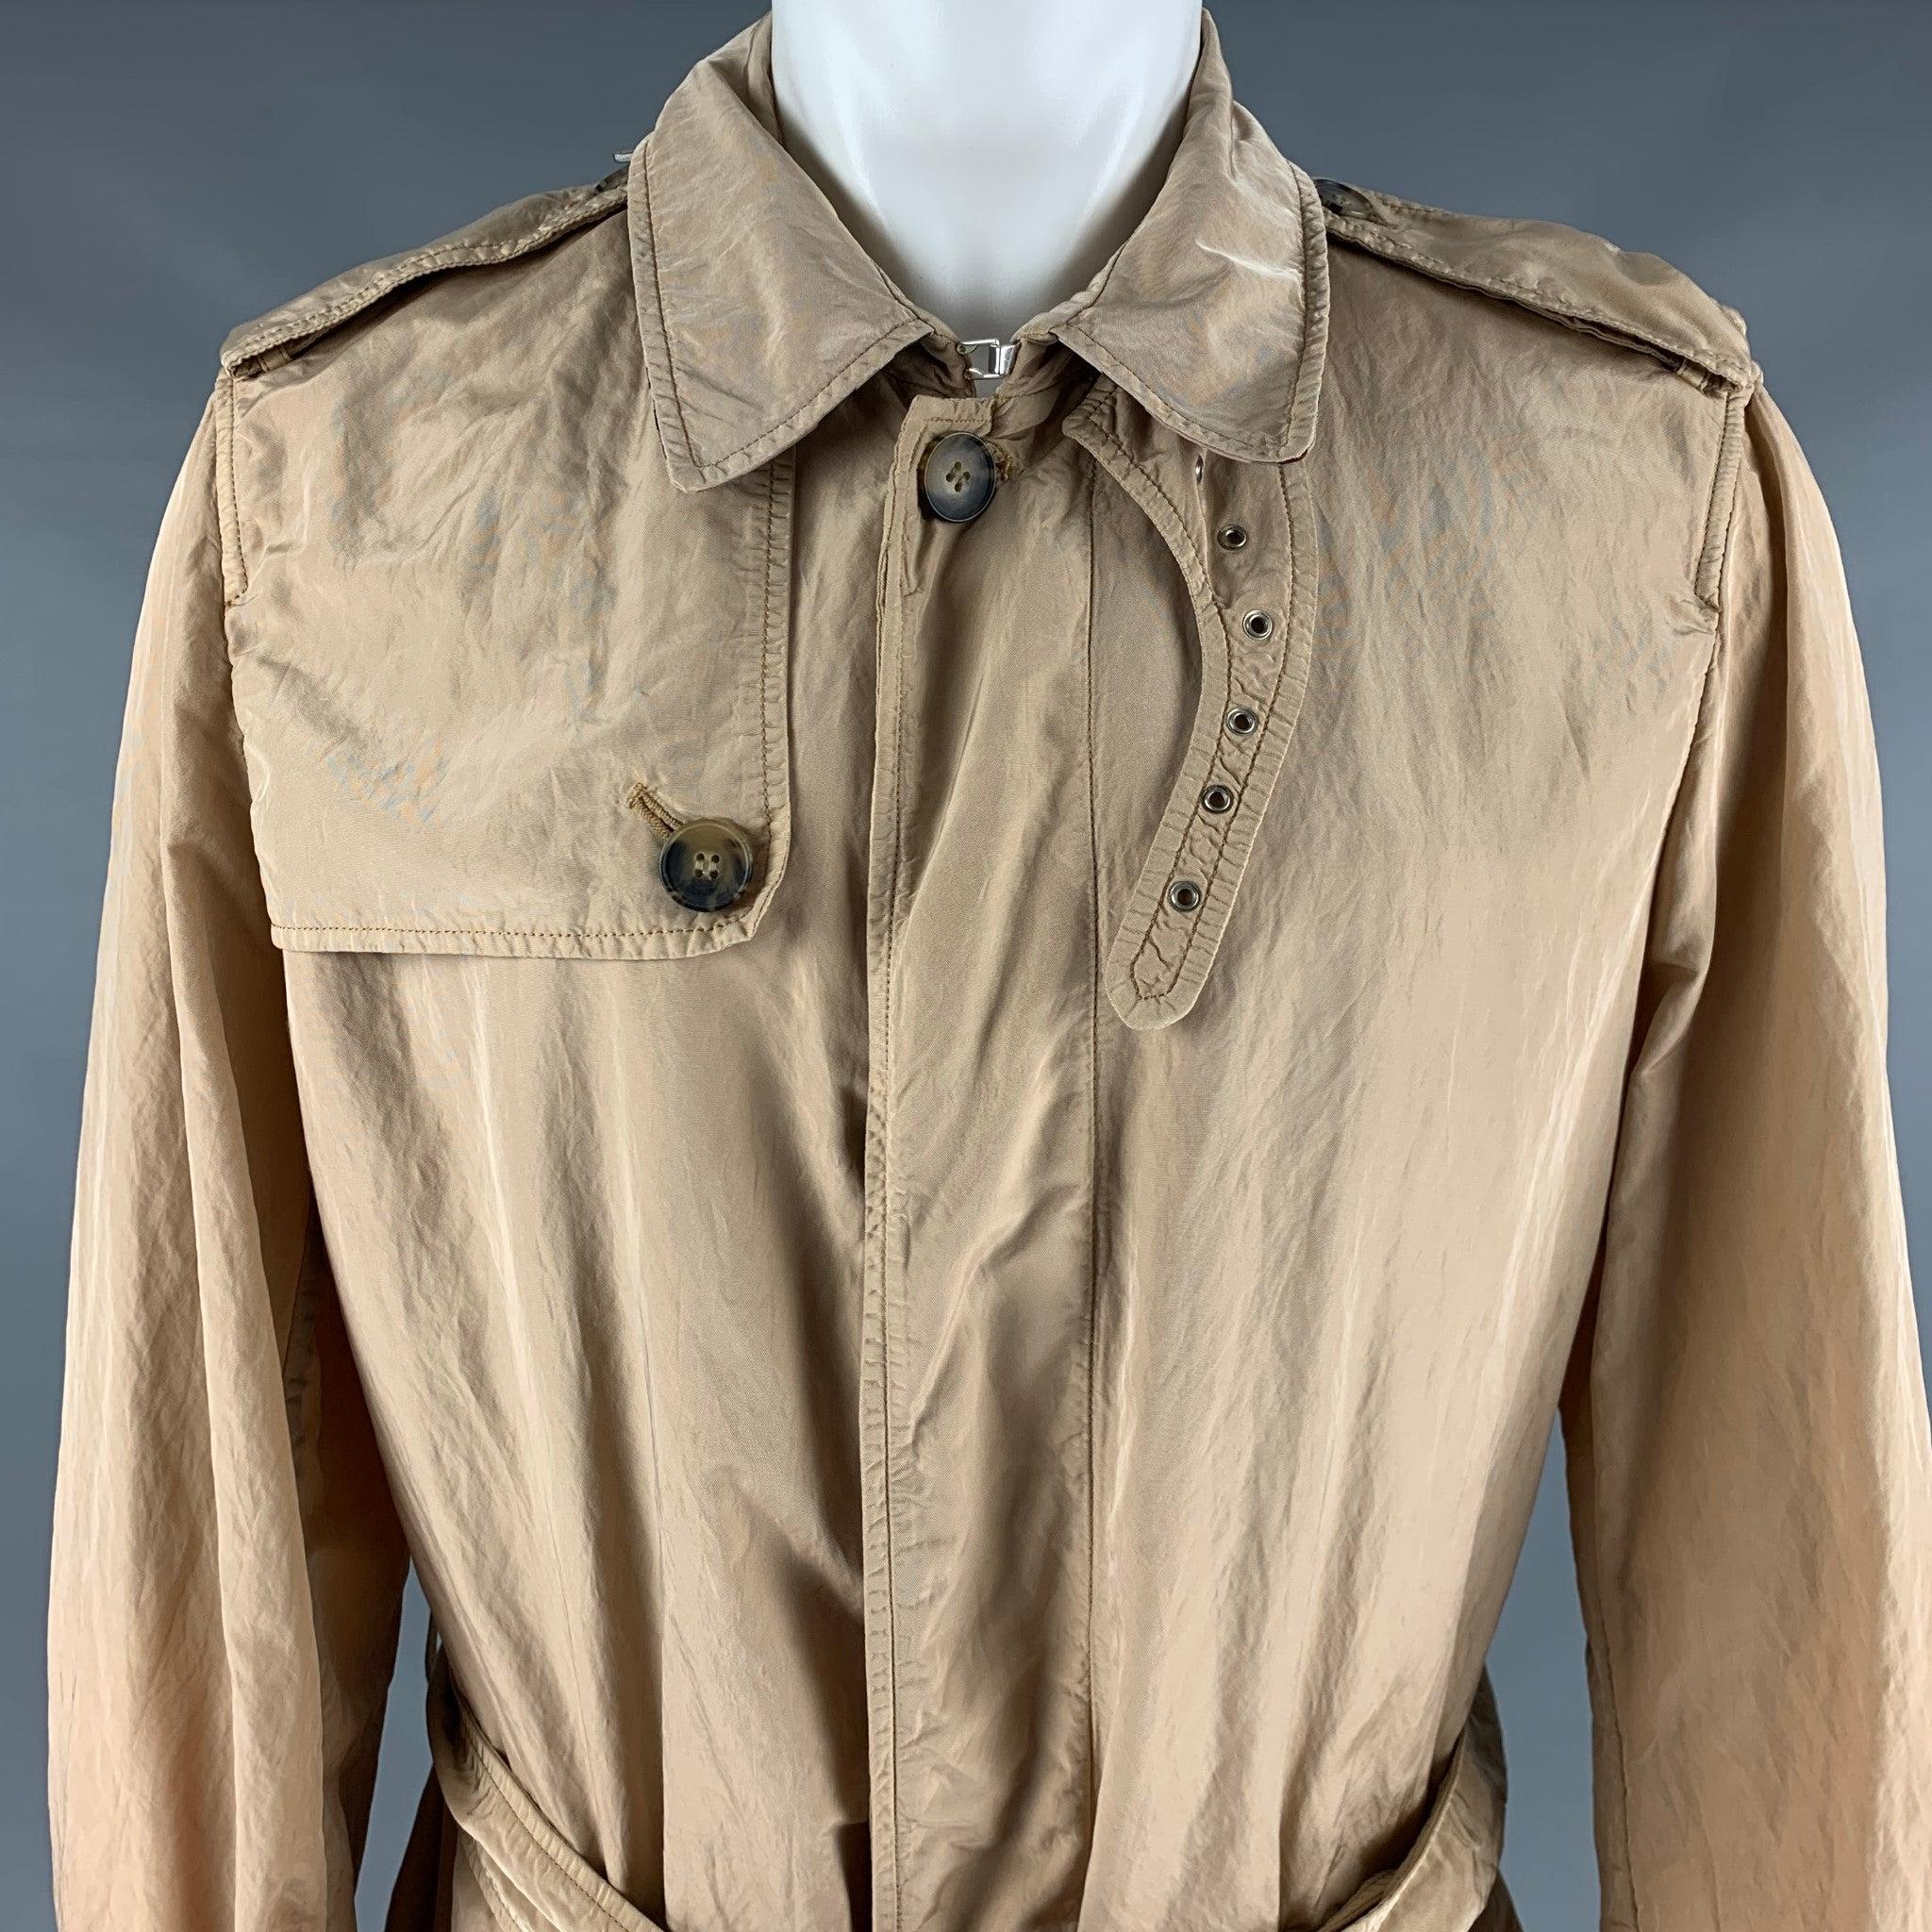 BURBERRY LONDON trenchcoat
in a beige nylon fabric featuring a belted style, and hidden button closure. Made in Italy.Very Good Pre-Owned Condition. Minor signs of wear. 

Marked:   M 

Measurements: 
 
Shoulder: 18 inches Chest: 44 inches Sleeve: